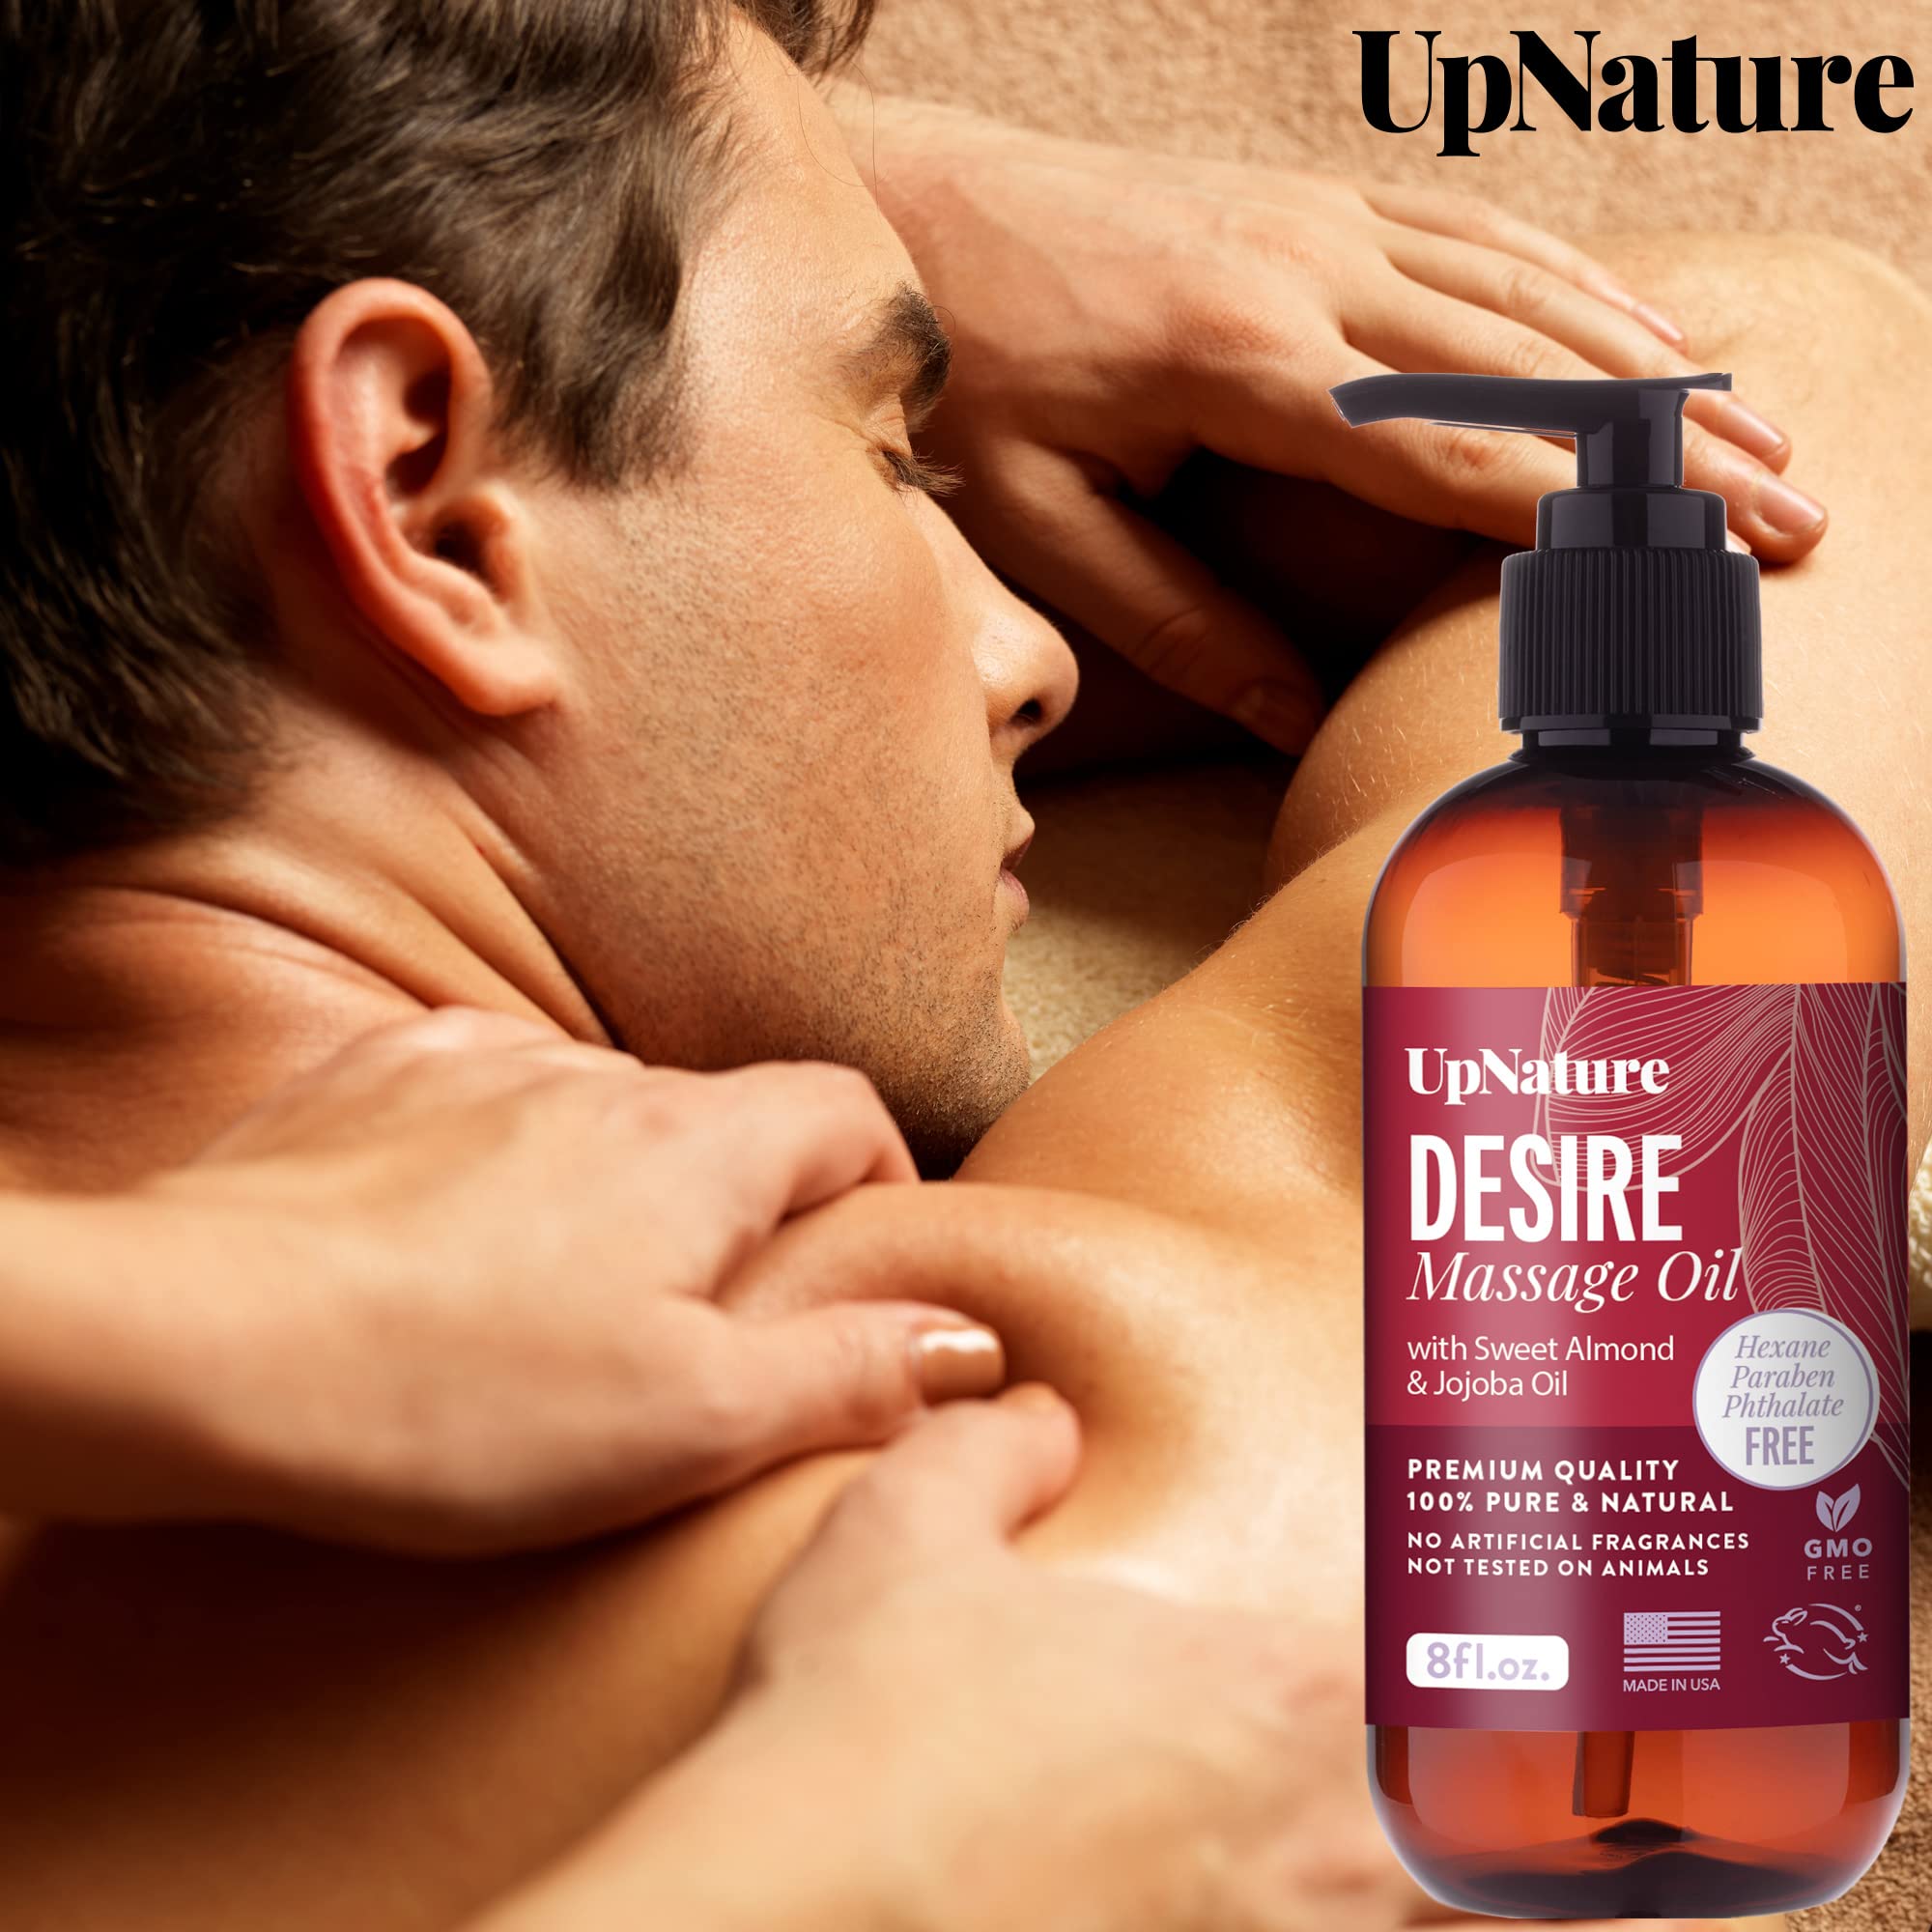 Desire Massage Oils for Date Night - Sensual Massage Oil - Valentines Day Gifts for Him and Her - Wife and Husband Valentine's Day Gifts - Massage Oil for Couples - Have a Relax & Fun Date Night!